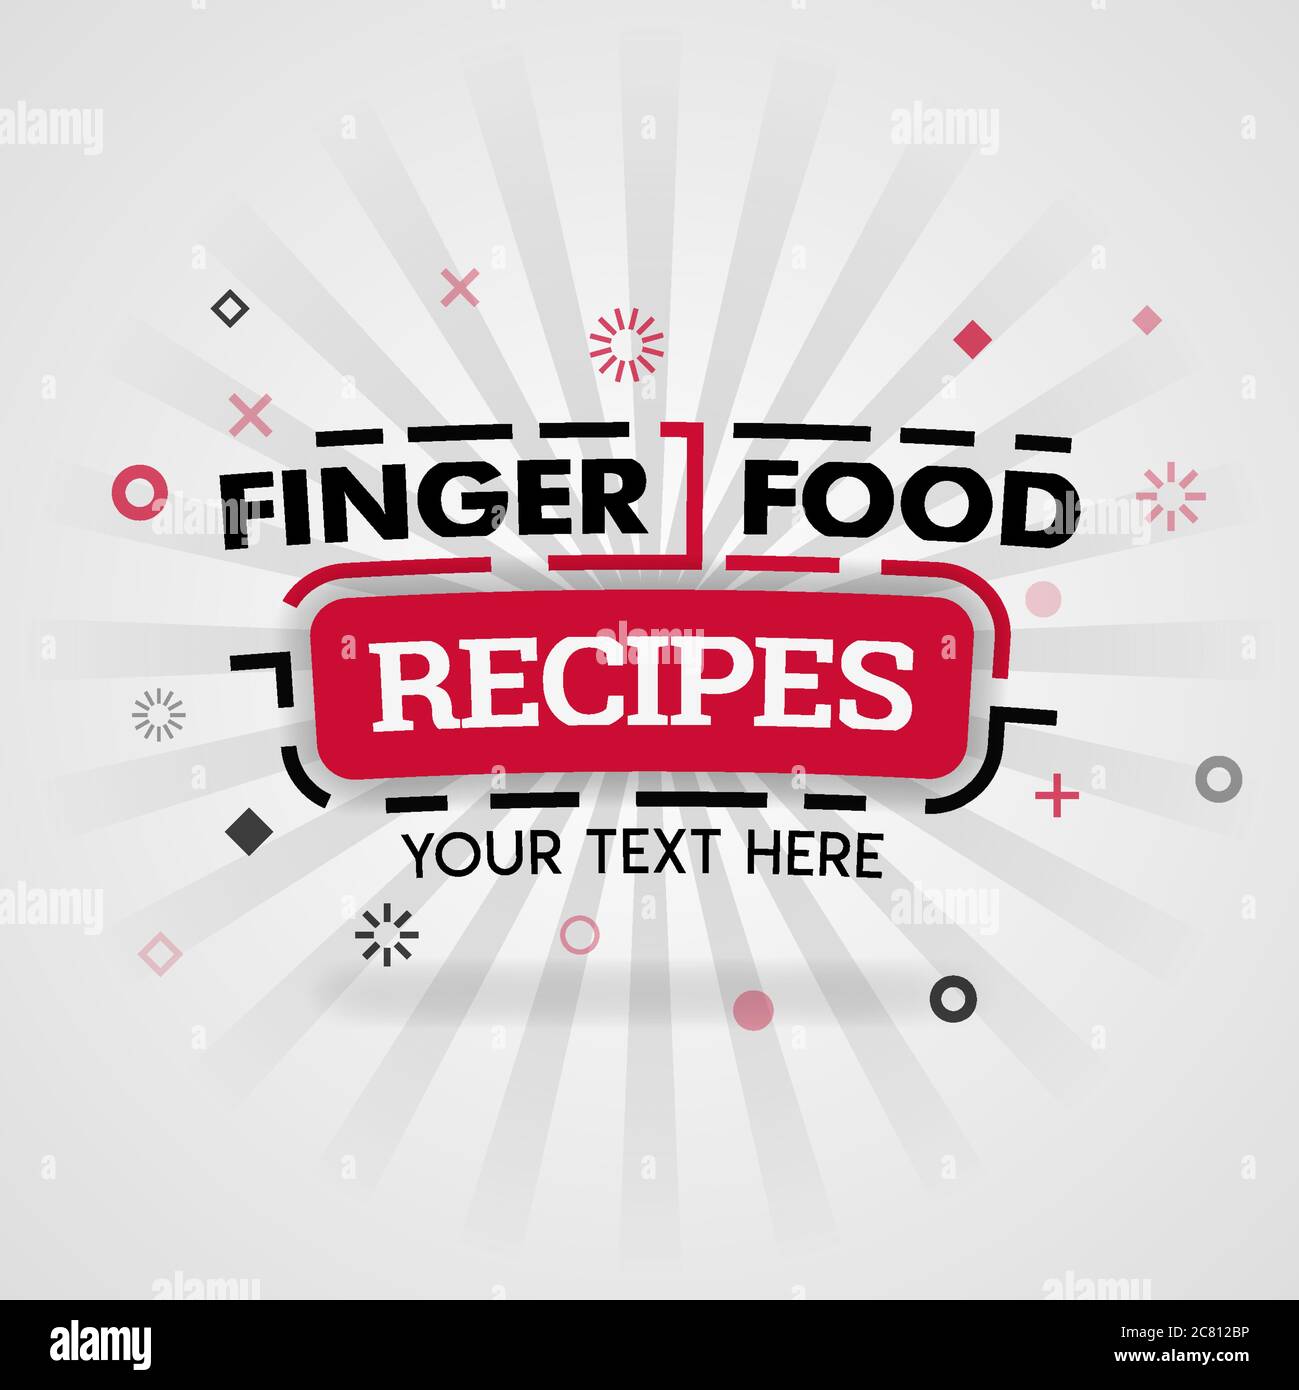 Template for finger food recipes red cover book. Can be use for food advertising poster and flyer, social media post promotion, online marketing. Food Stock Vector